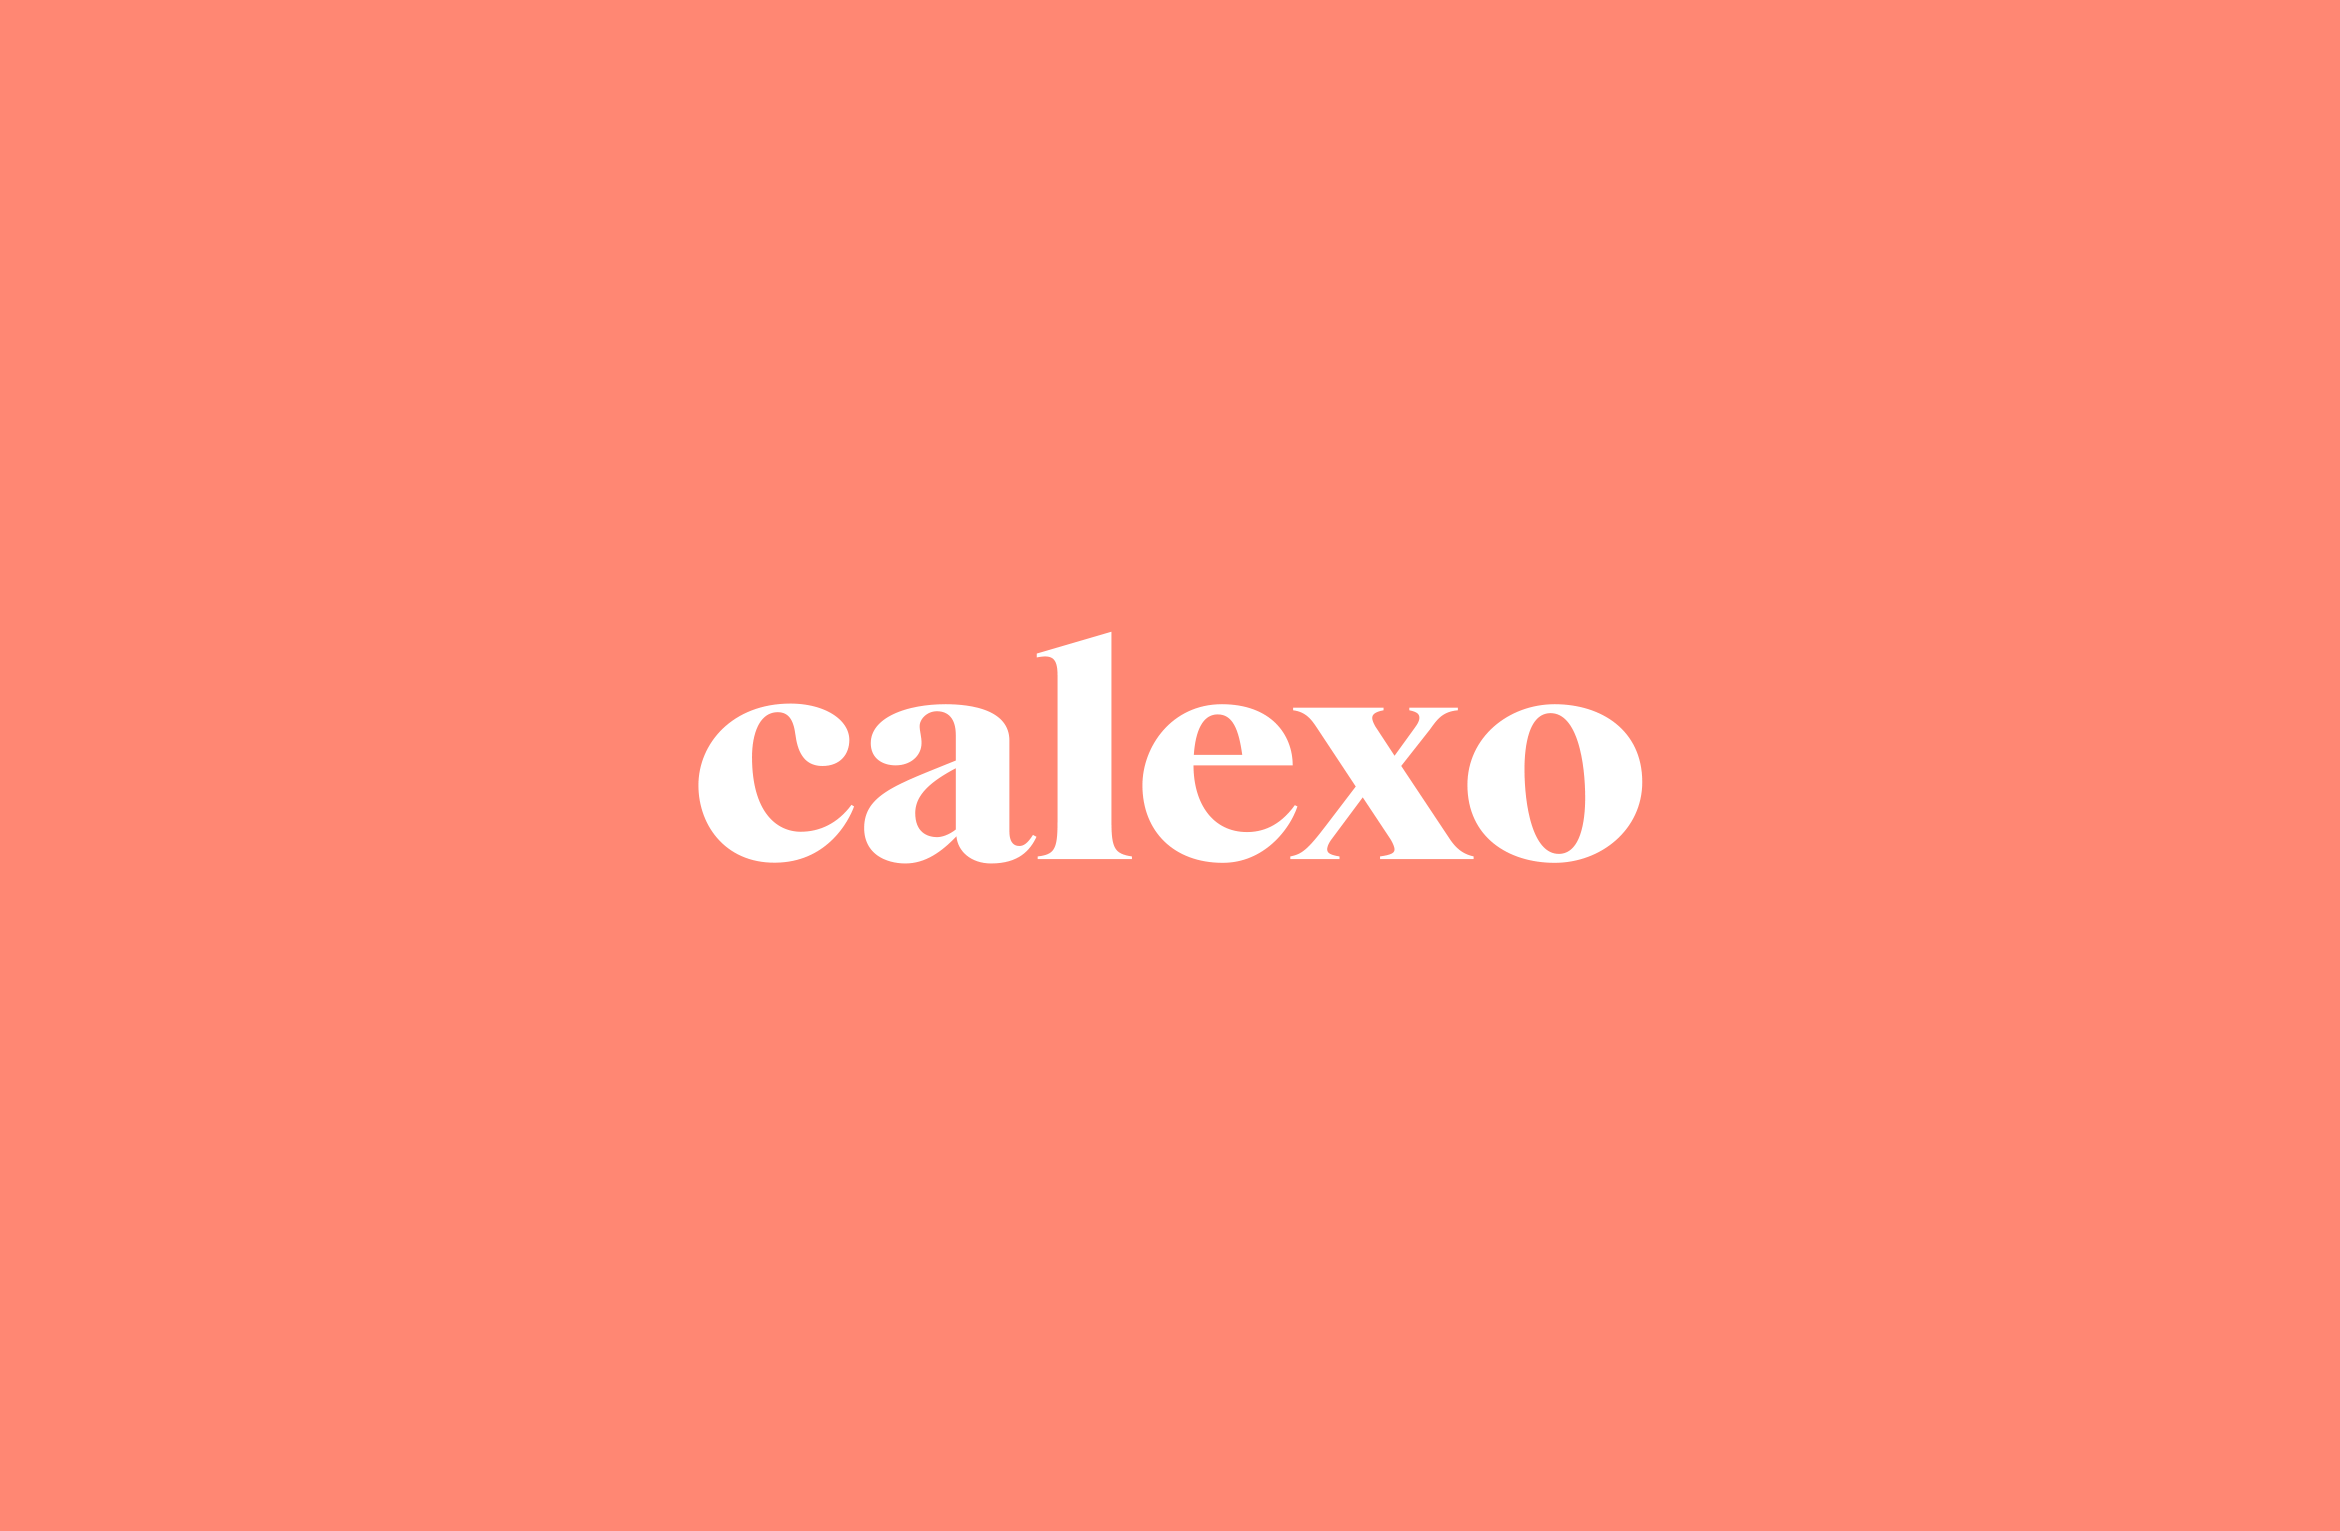 calexo logotype animation with different colors